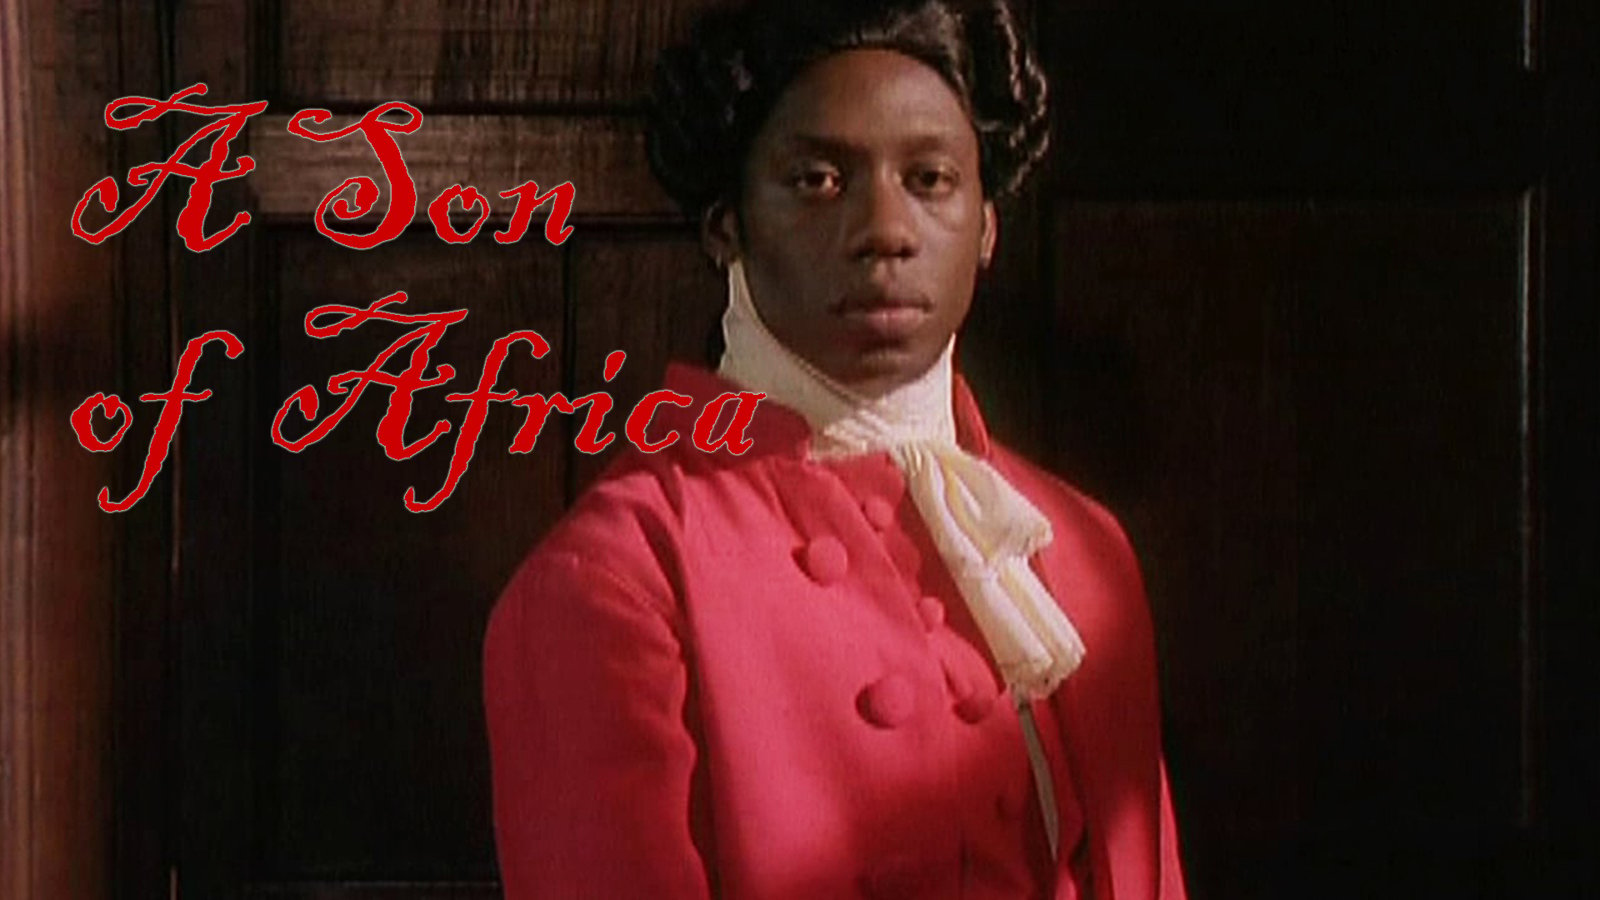 A Son of Africa - The Autobiography of a Slave